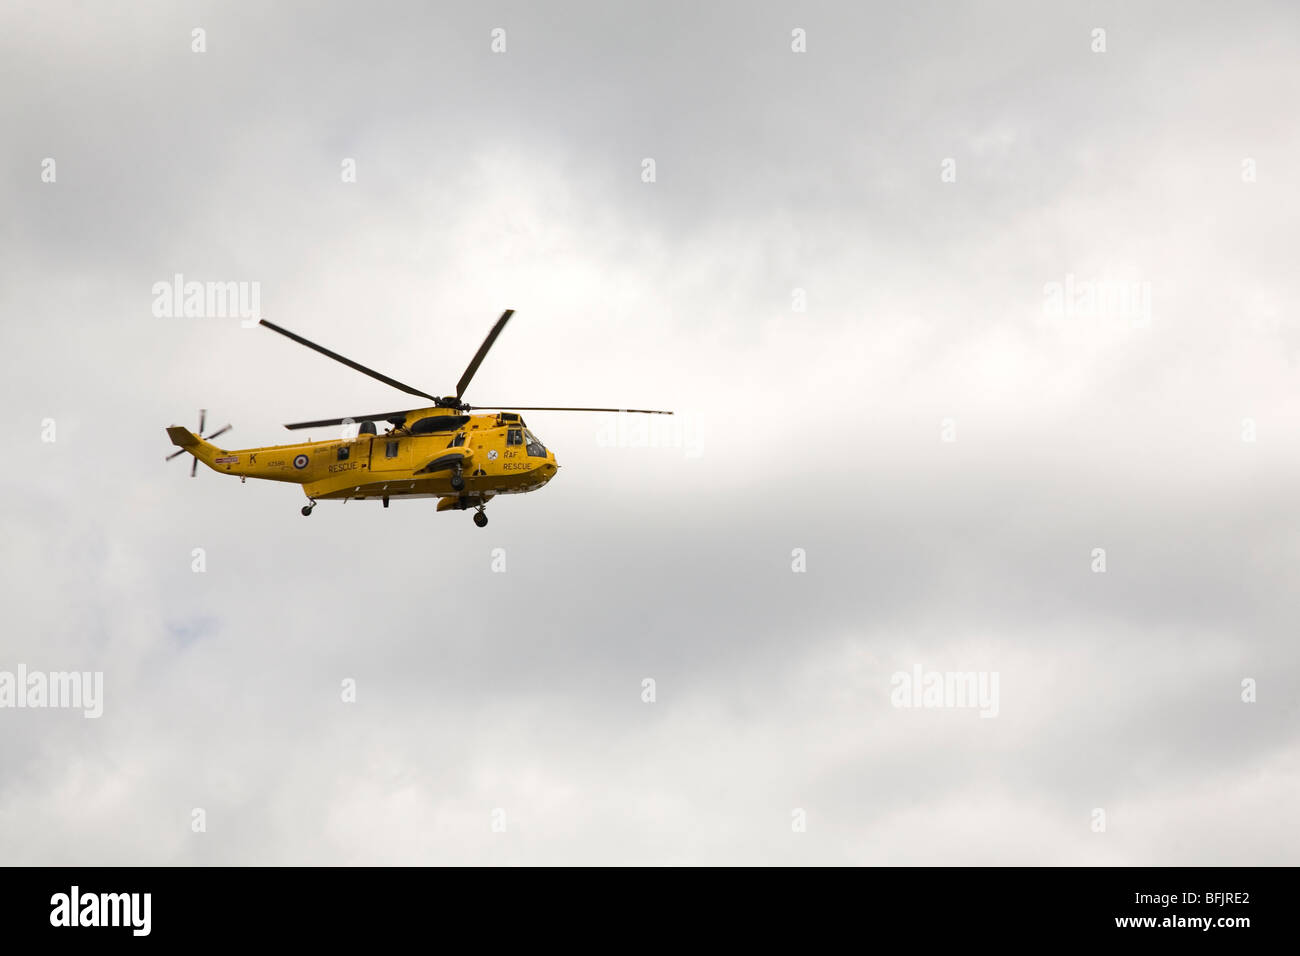 A yellow Sea King helicopter in flight. Such helicopters are used for emergency rescue missions. Stock Photo